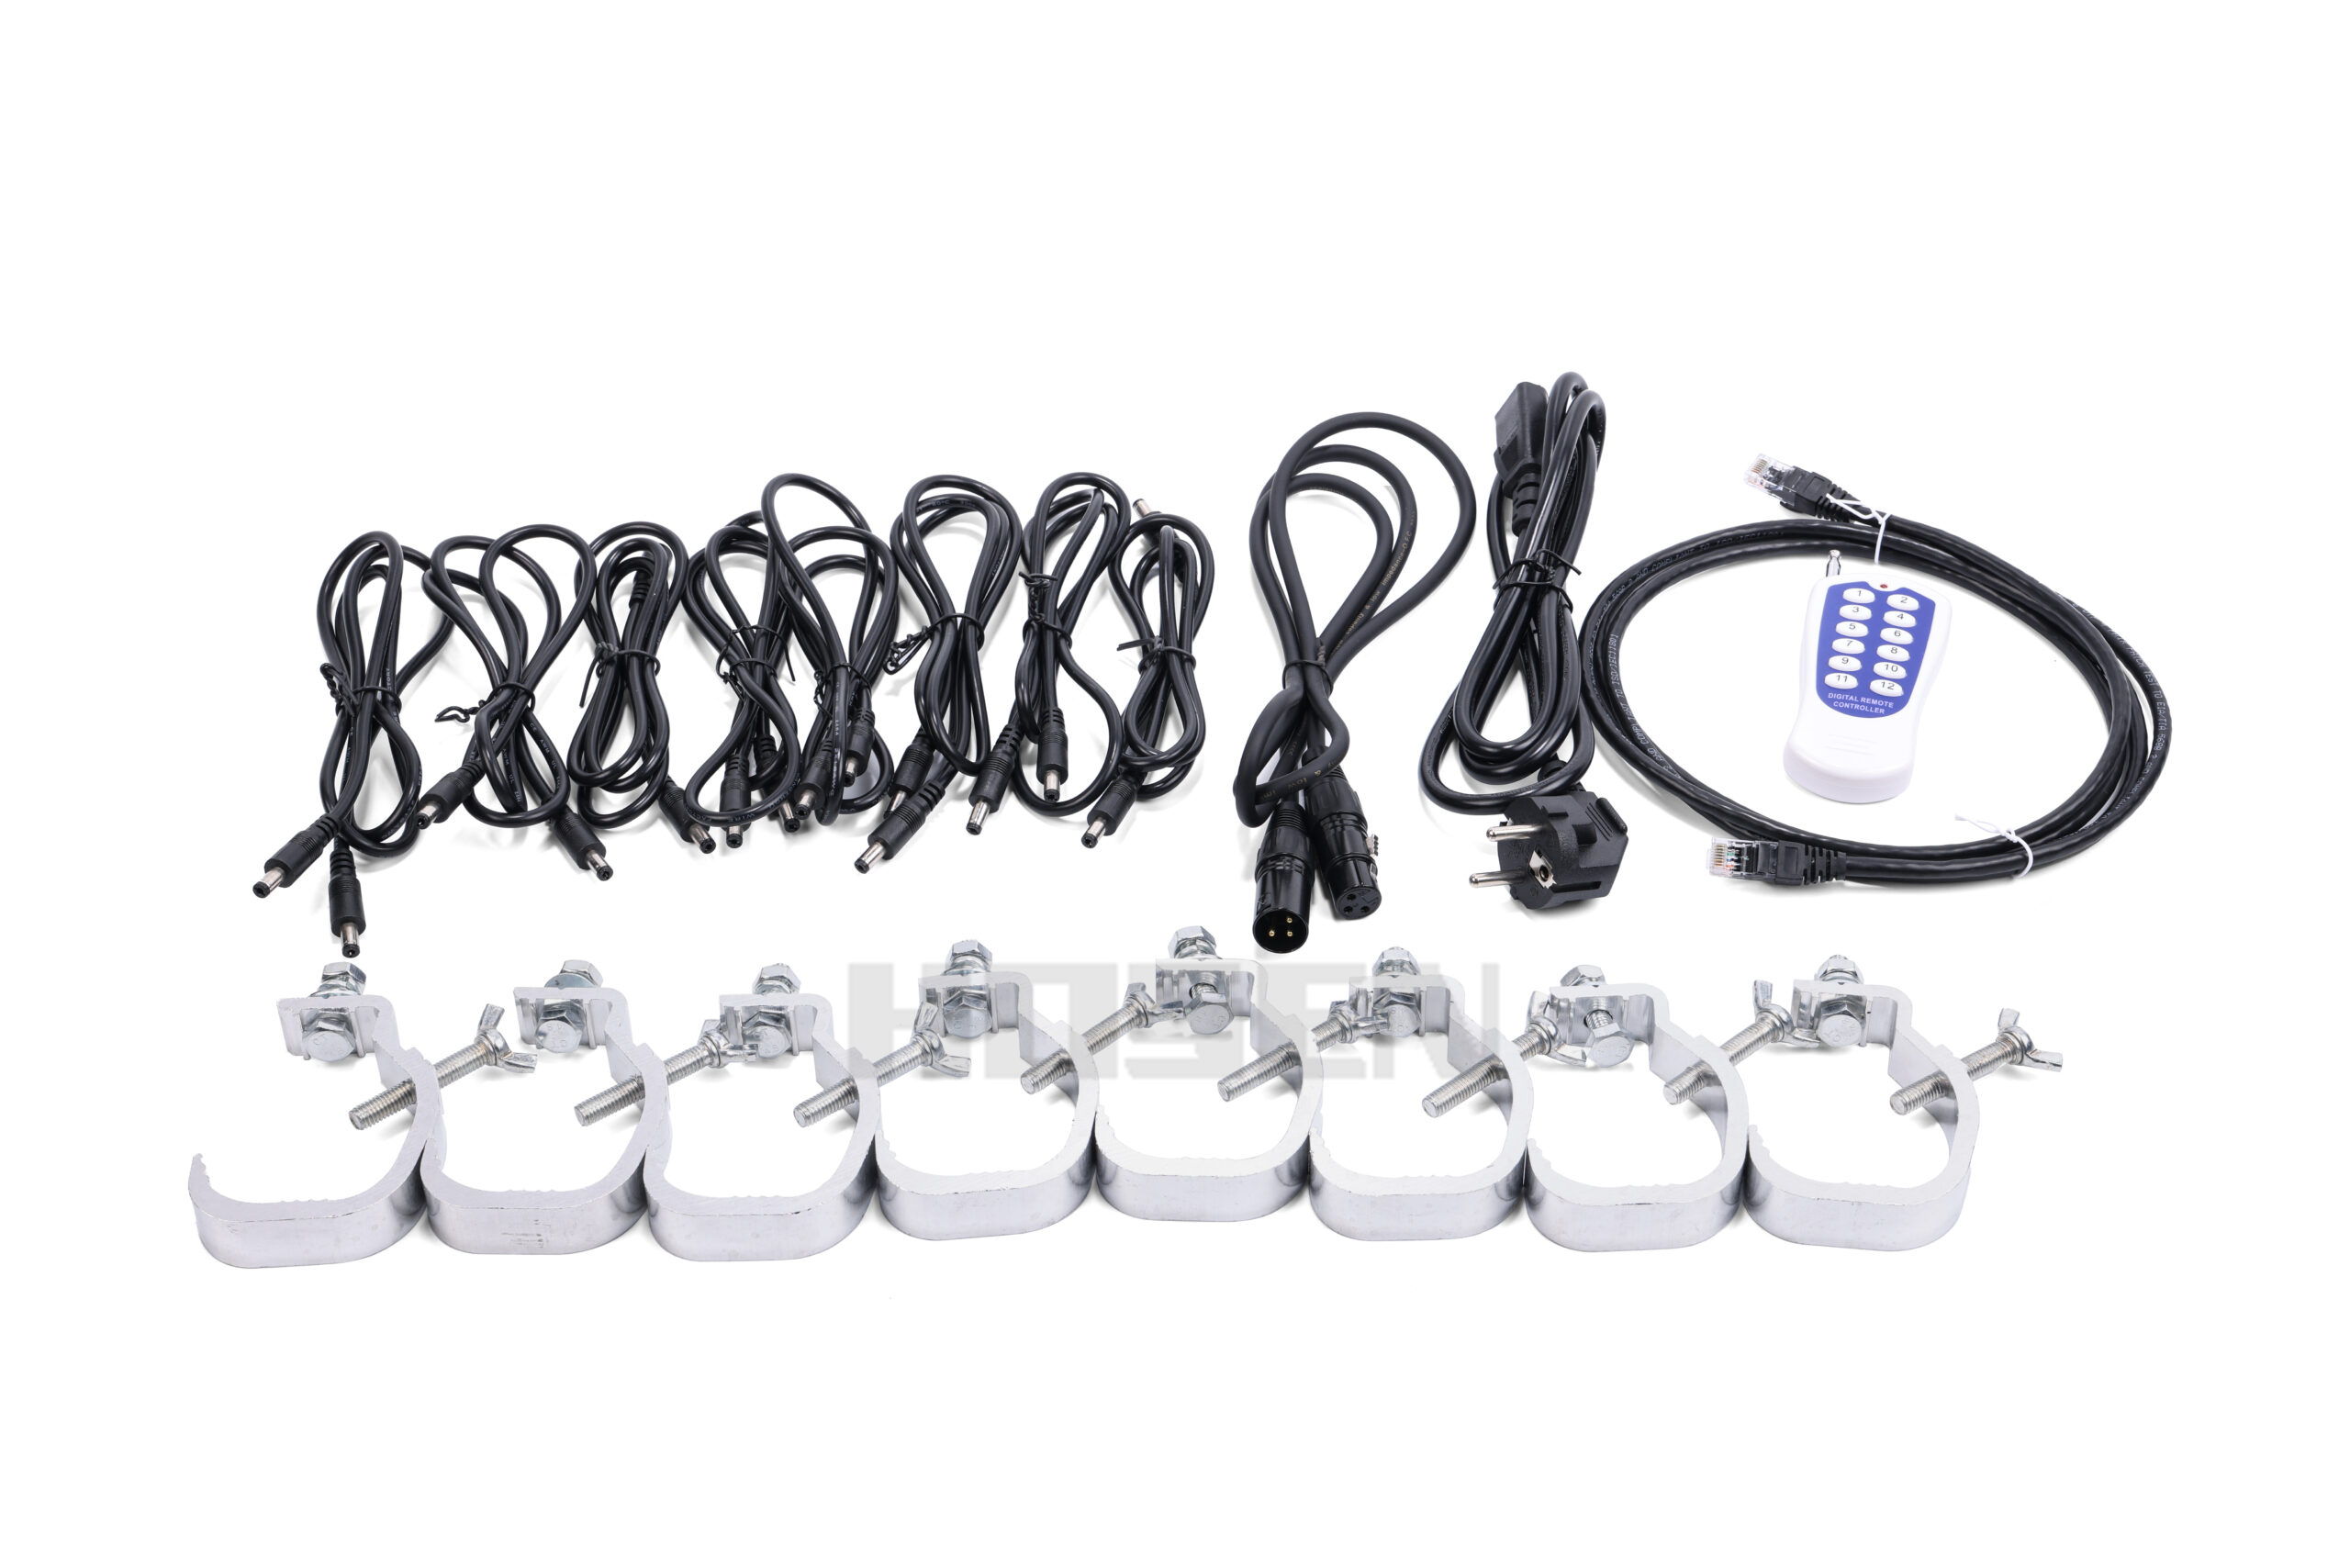 Hosenlighting Battery Wireless Led 360 Tube(8 tubes  with flight case and controller and spare parts)HS-TUBE-BW360 - Led stage light - 6